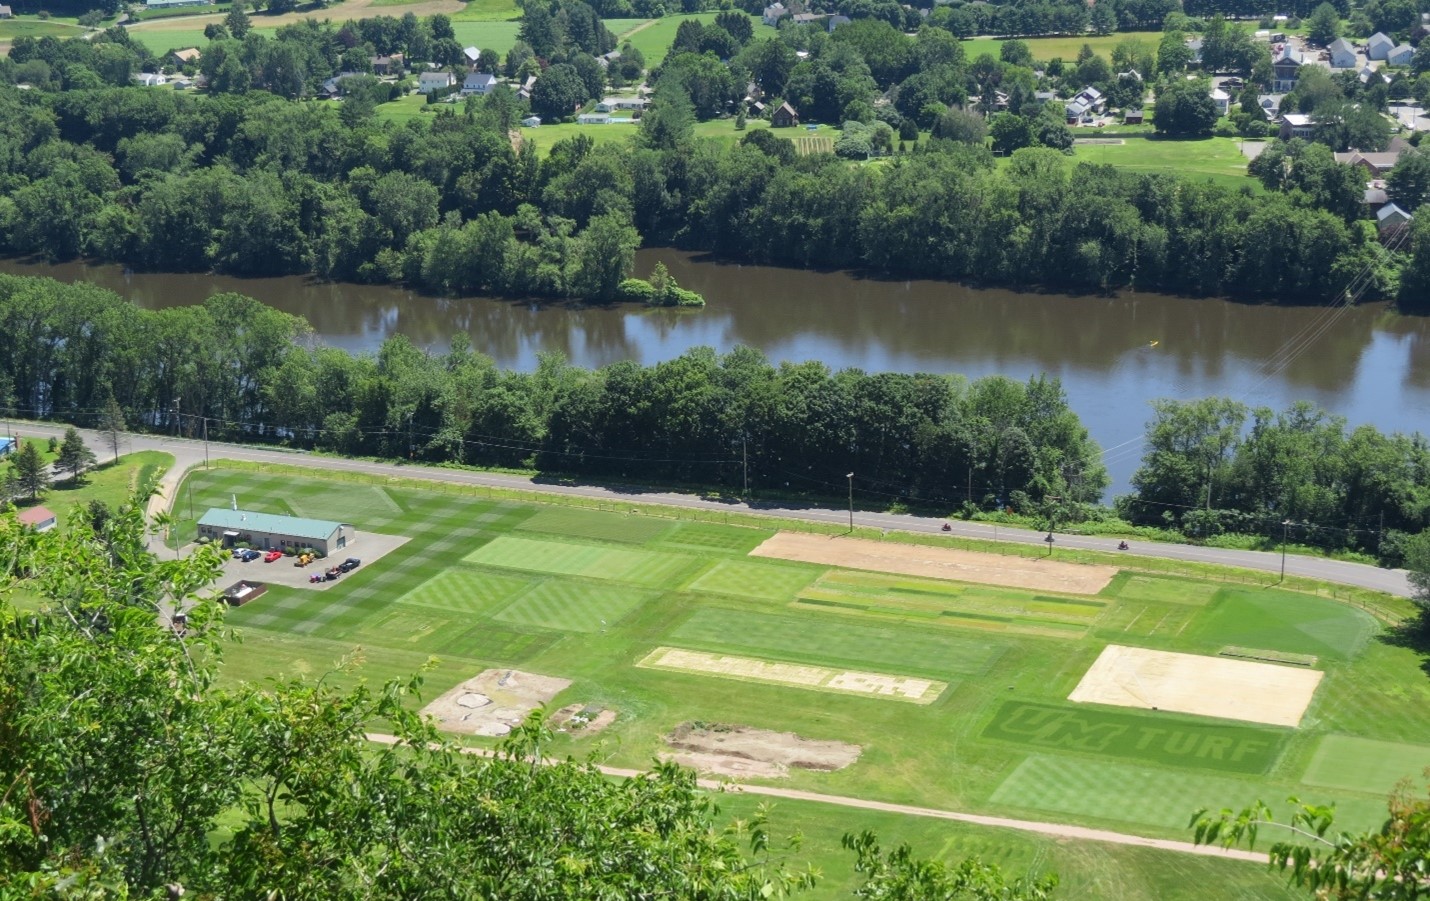 Joseph Troll Turfgrass Research and Education Center dedicated in 2004 is bordered by the Connecticut River in South Deerfield, Massachusetts (photo from 2019).